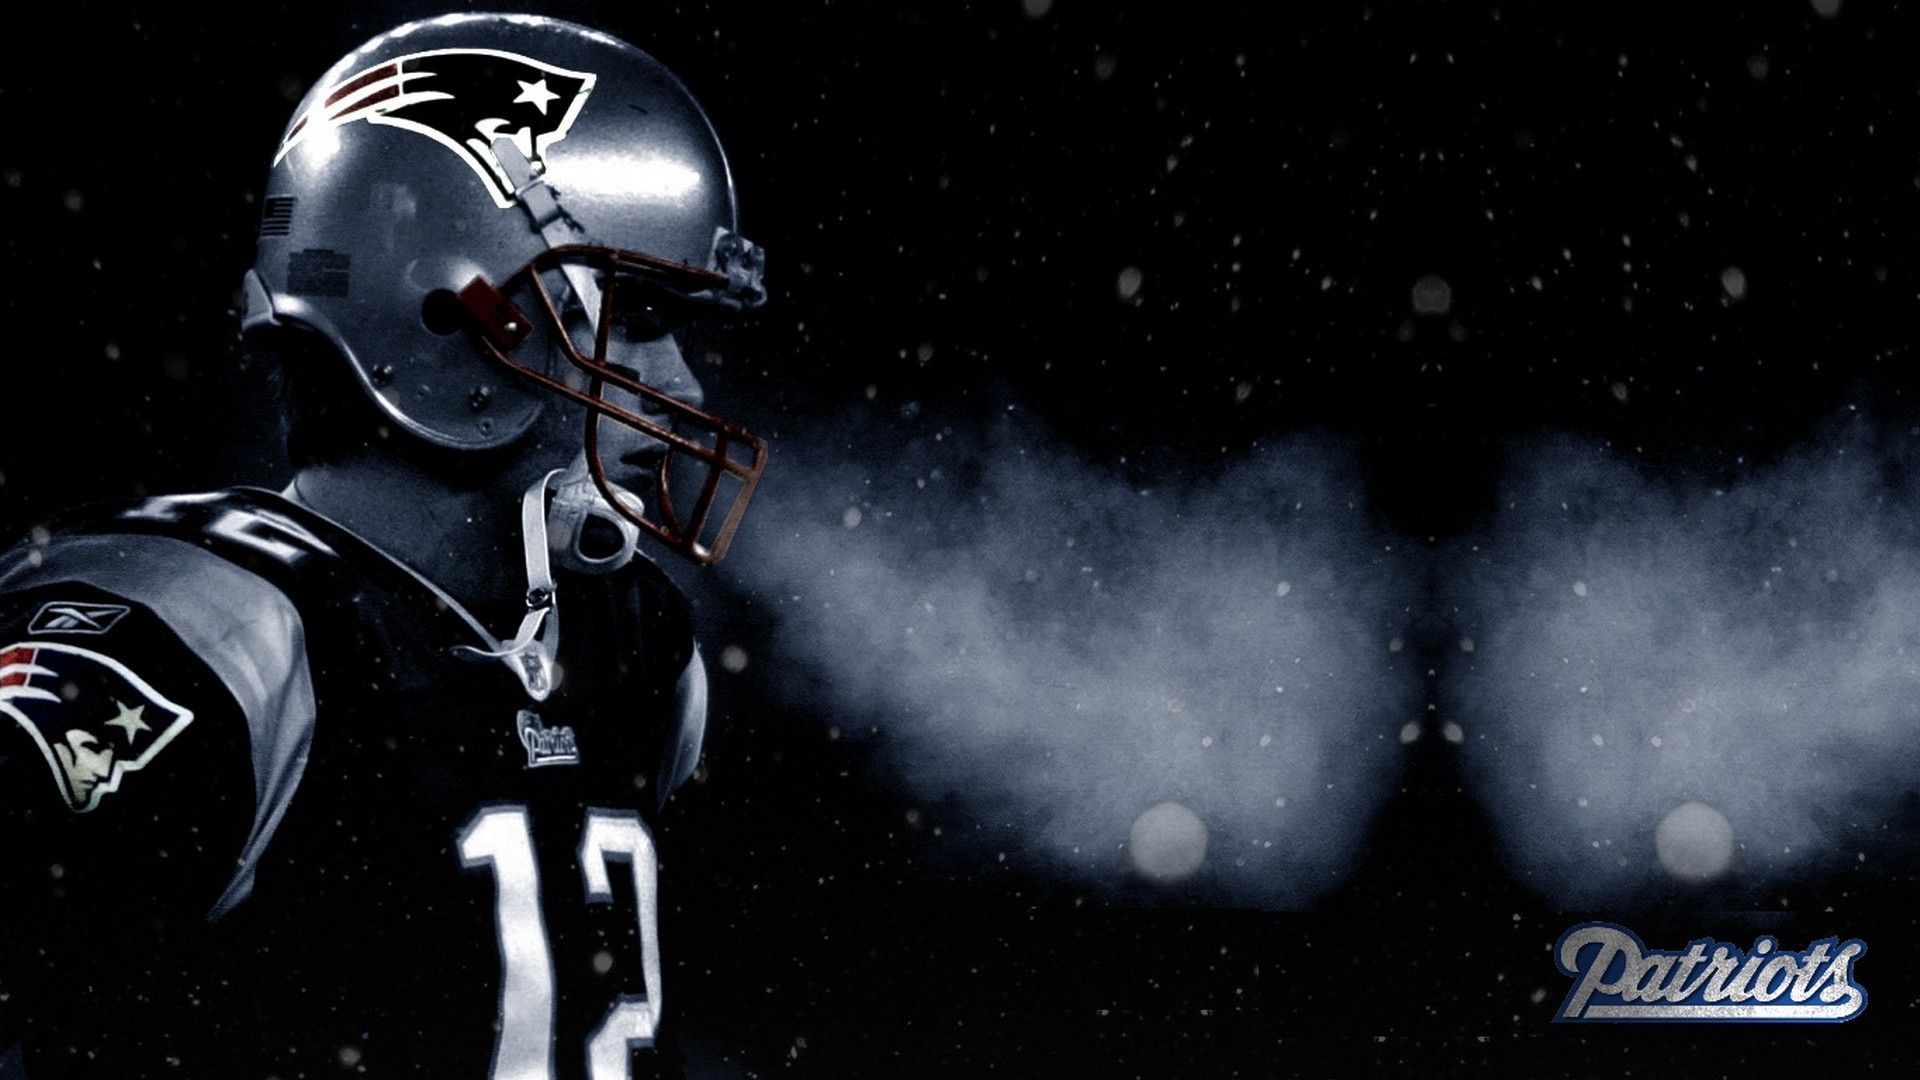 Wallpaper HD Tom Brady Super Bowl with image resolution 1920x1080 pixel. You can make this wallpaper for your Desktop Computer Backgrounds, Mac Wallpapers, Android Lock screen or iPhone Screensavers